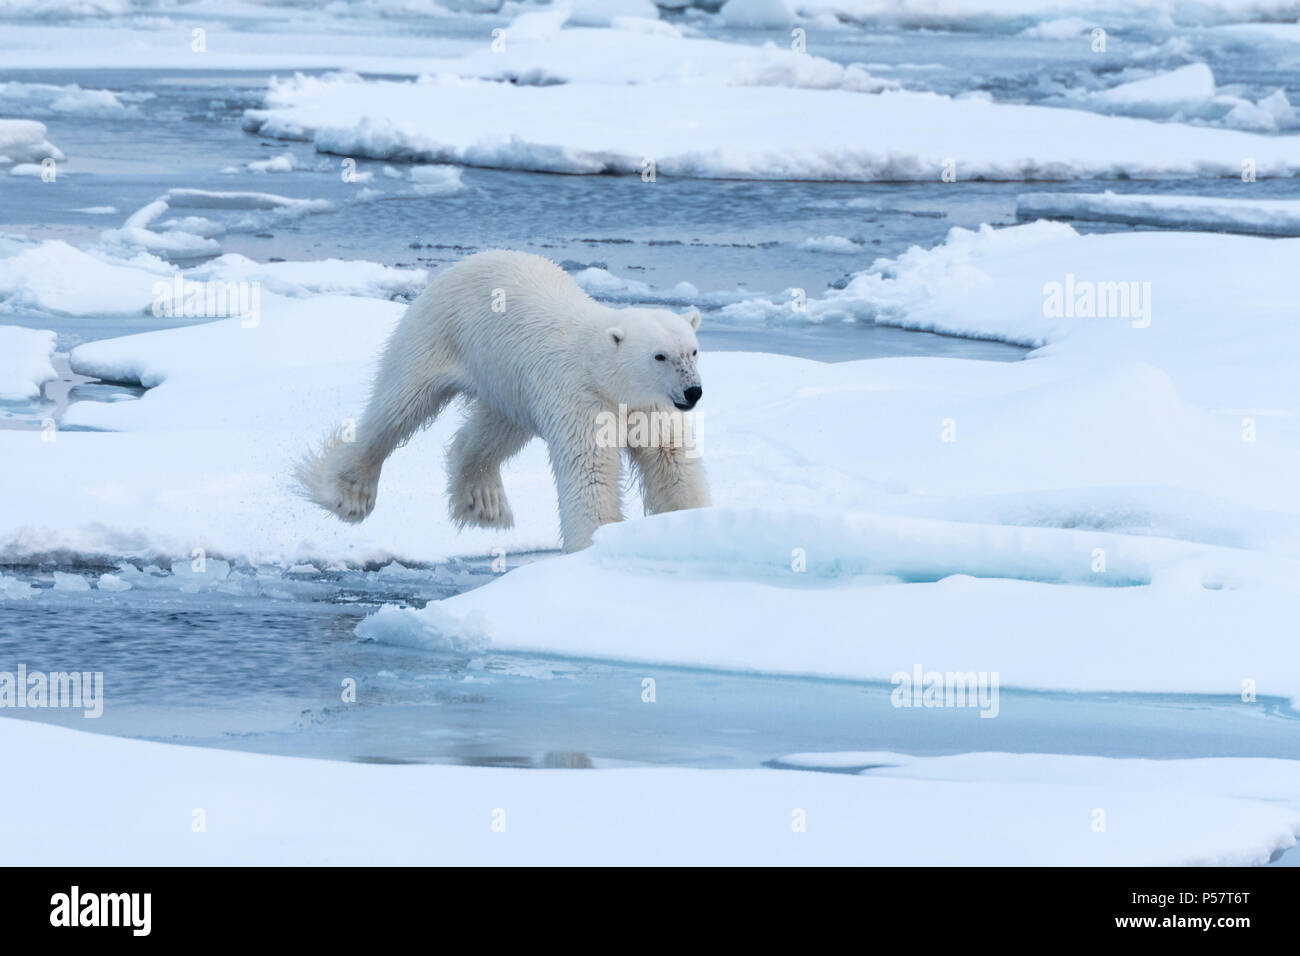 Orso polare jumping tra ice floes Foto Stock